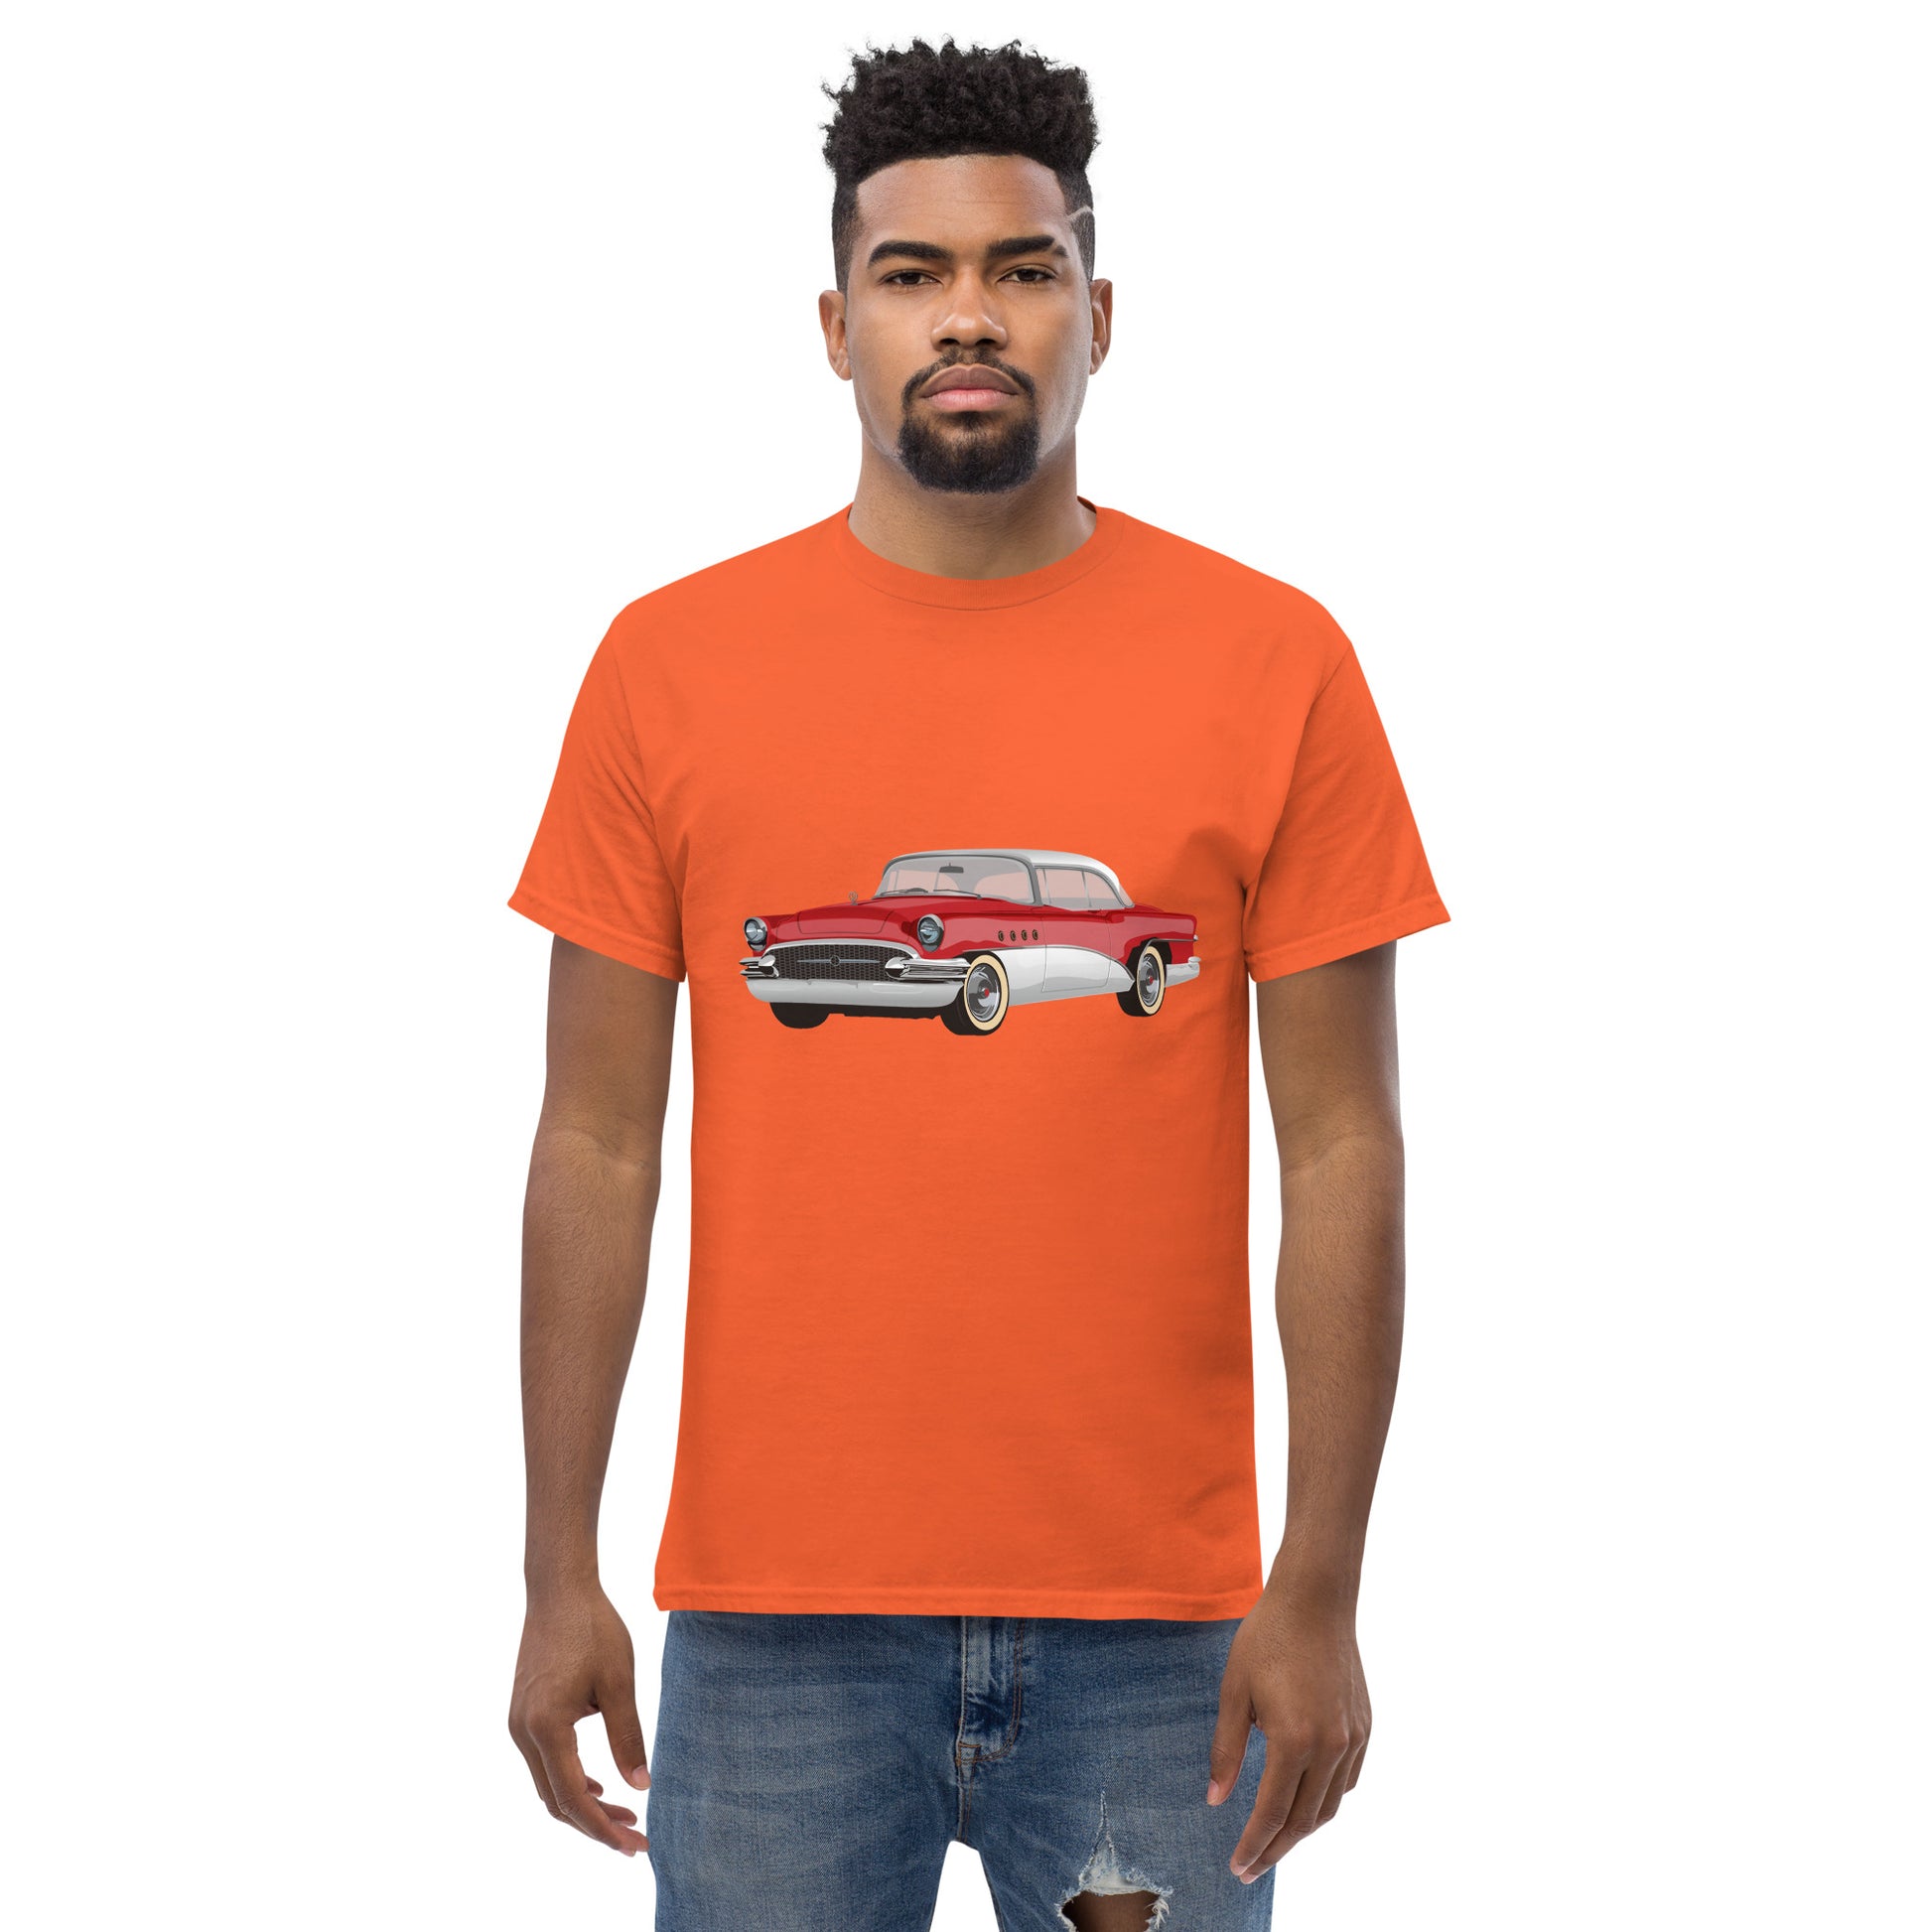 Men with orange t-shirt with red Chevrolet 